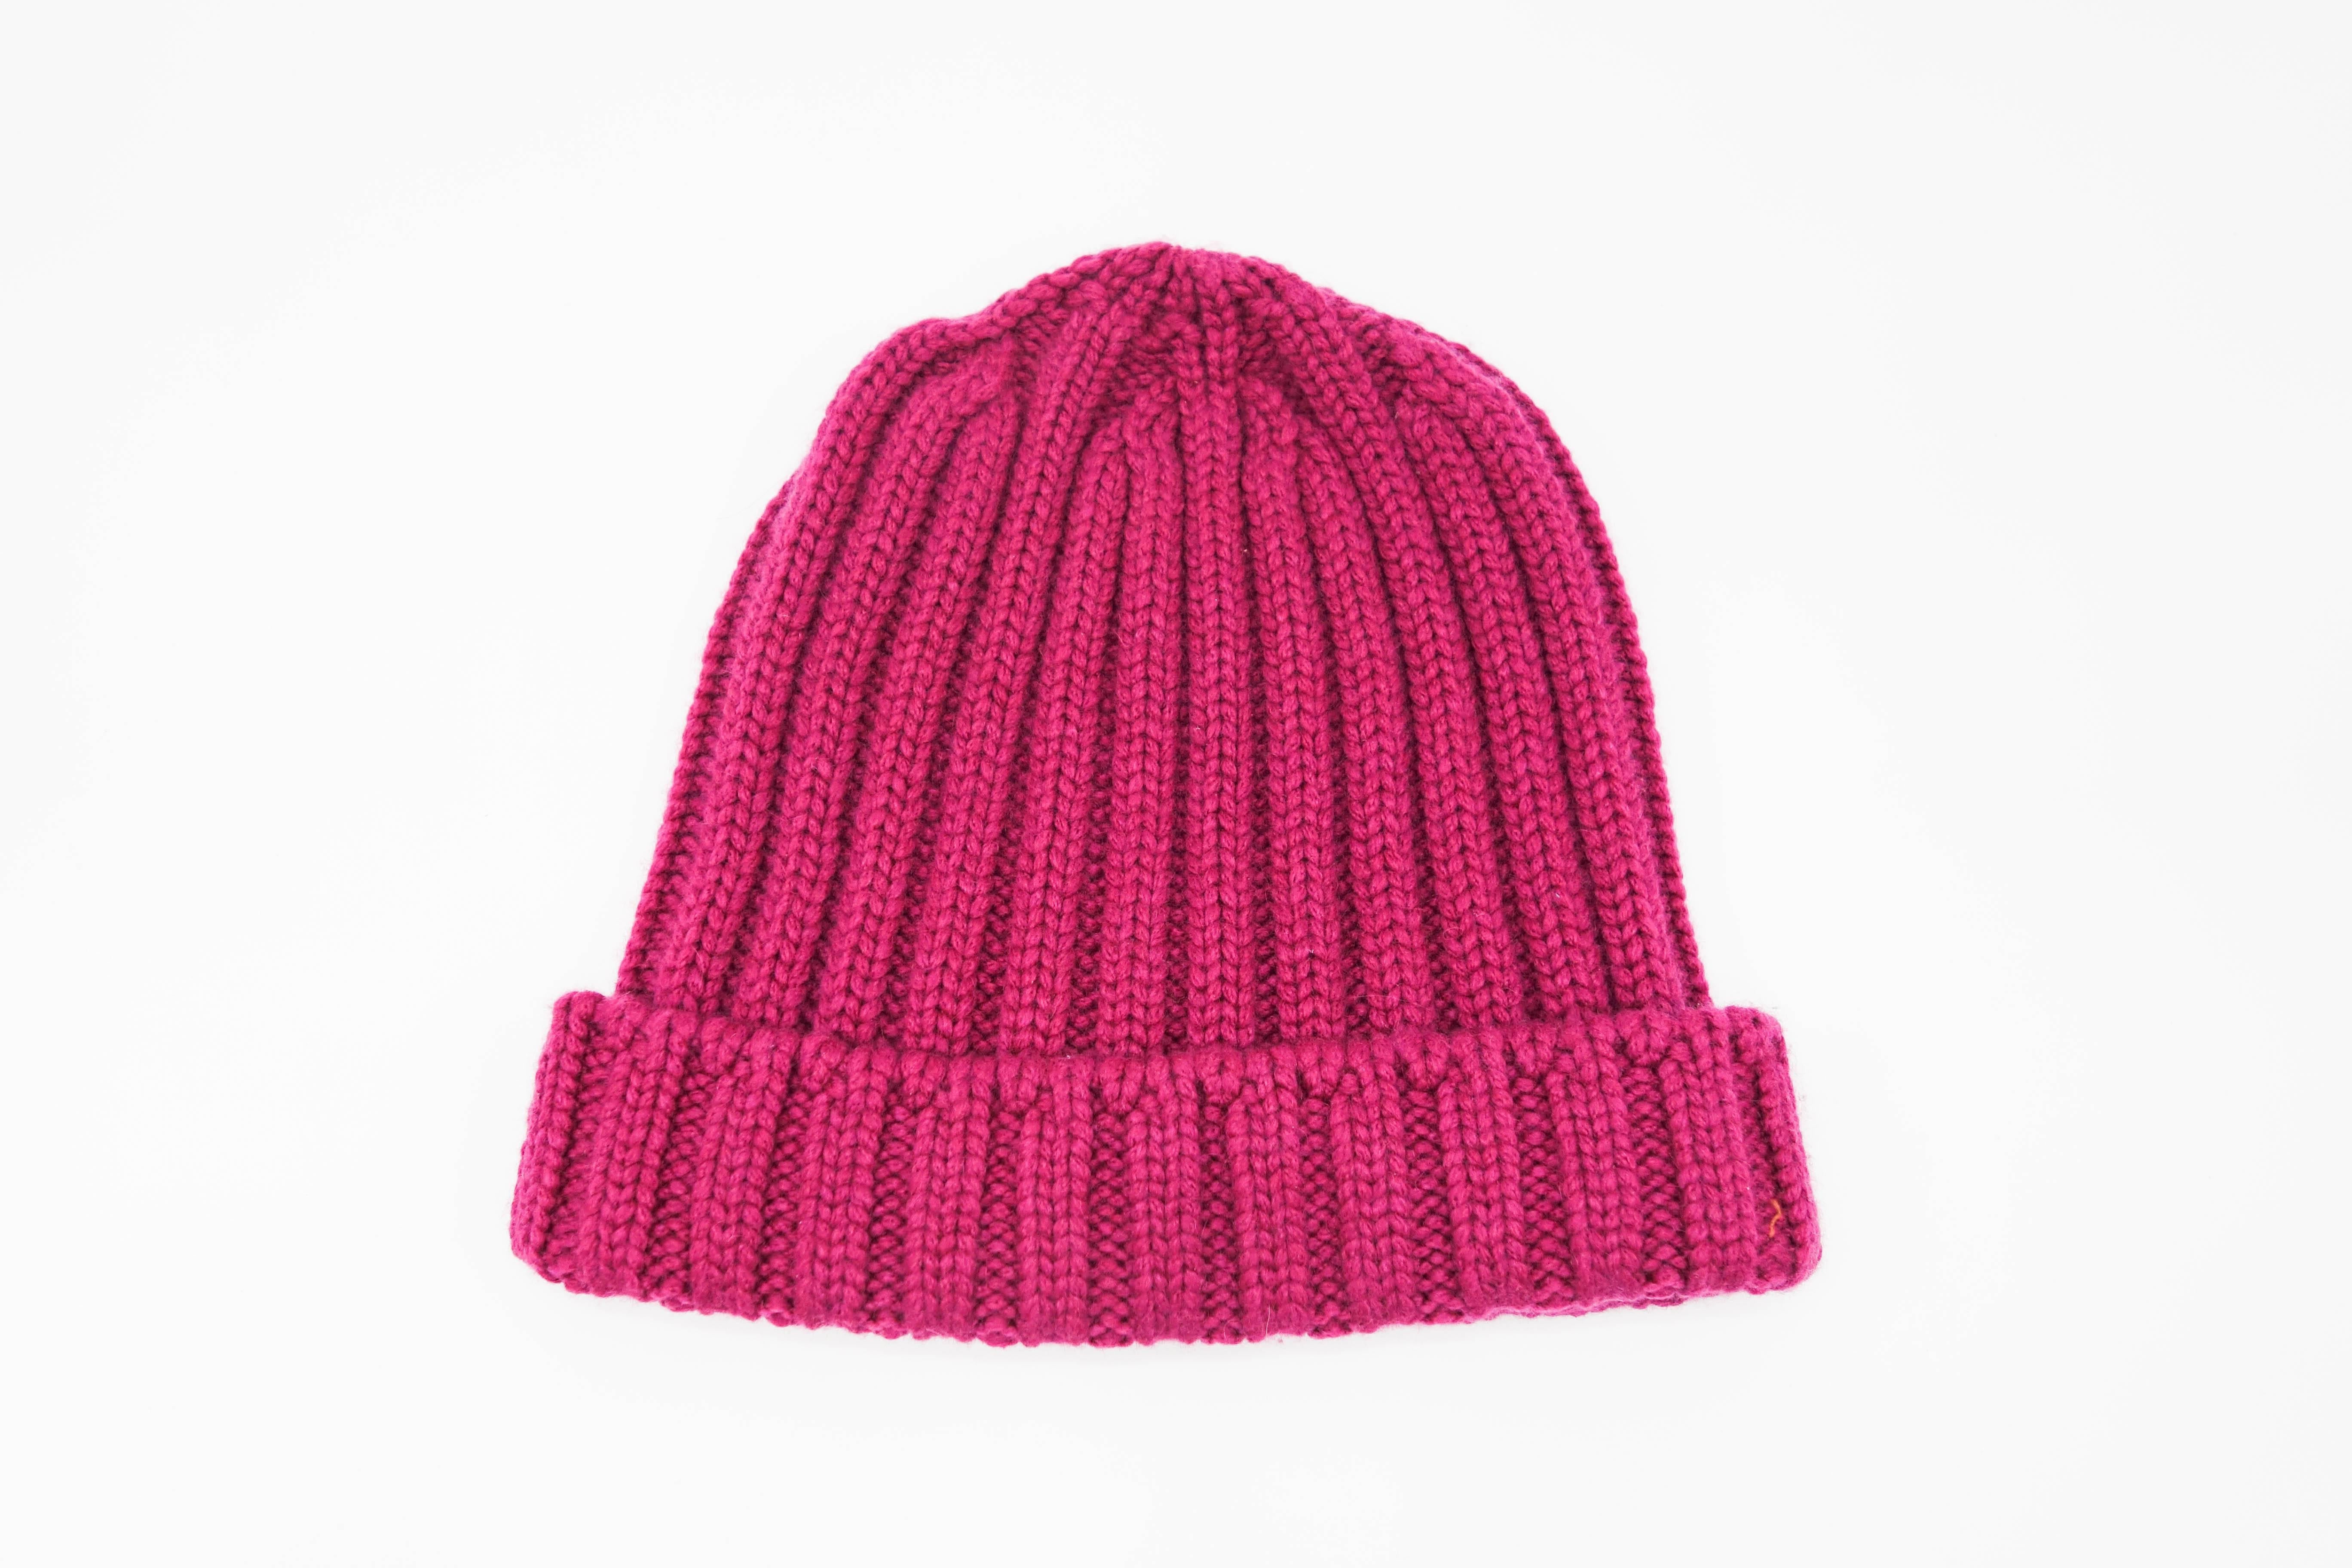 Brand new with tag Hermes rose cashmere hat/beanie. This beautifully knit 100% cashmere hat will keep you warm. The color is rose indien. Made in Italy.